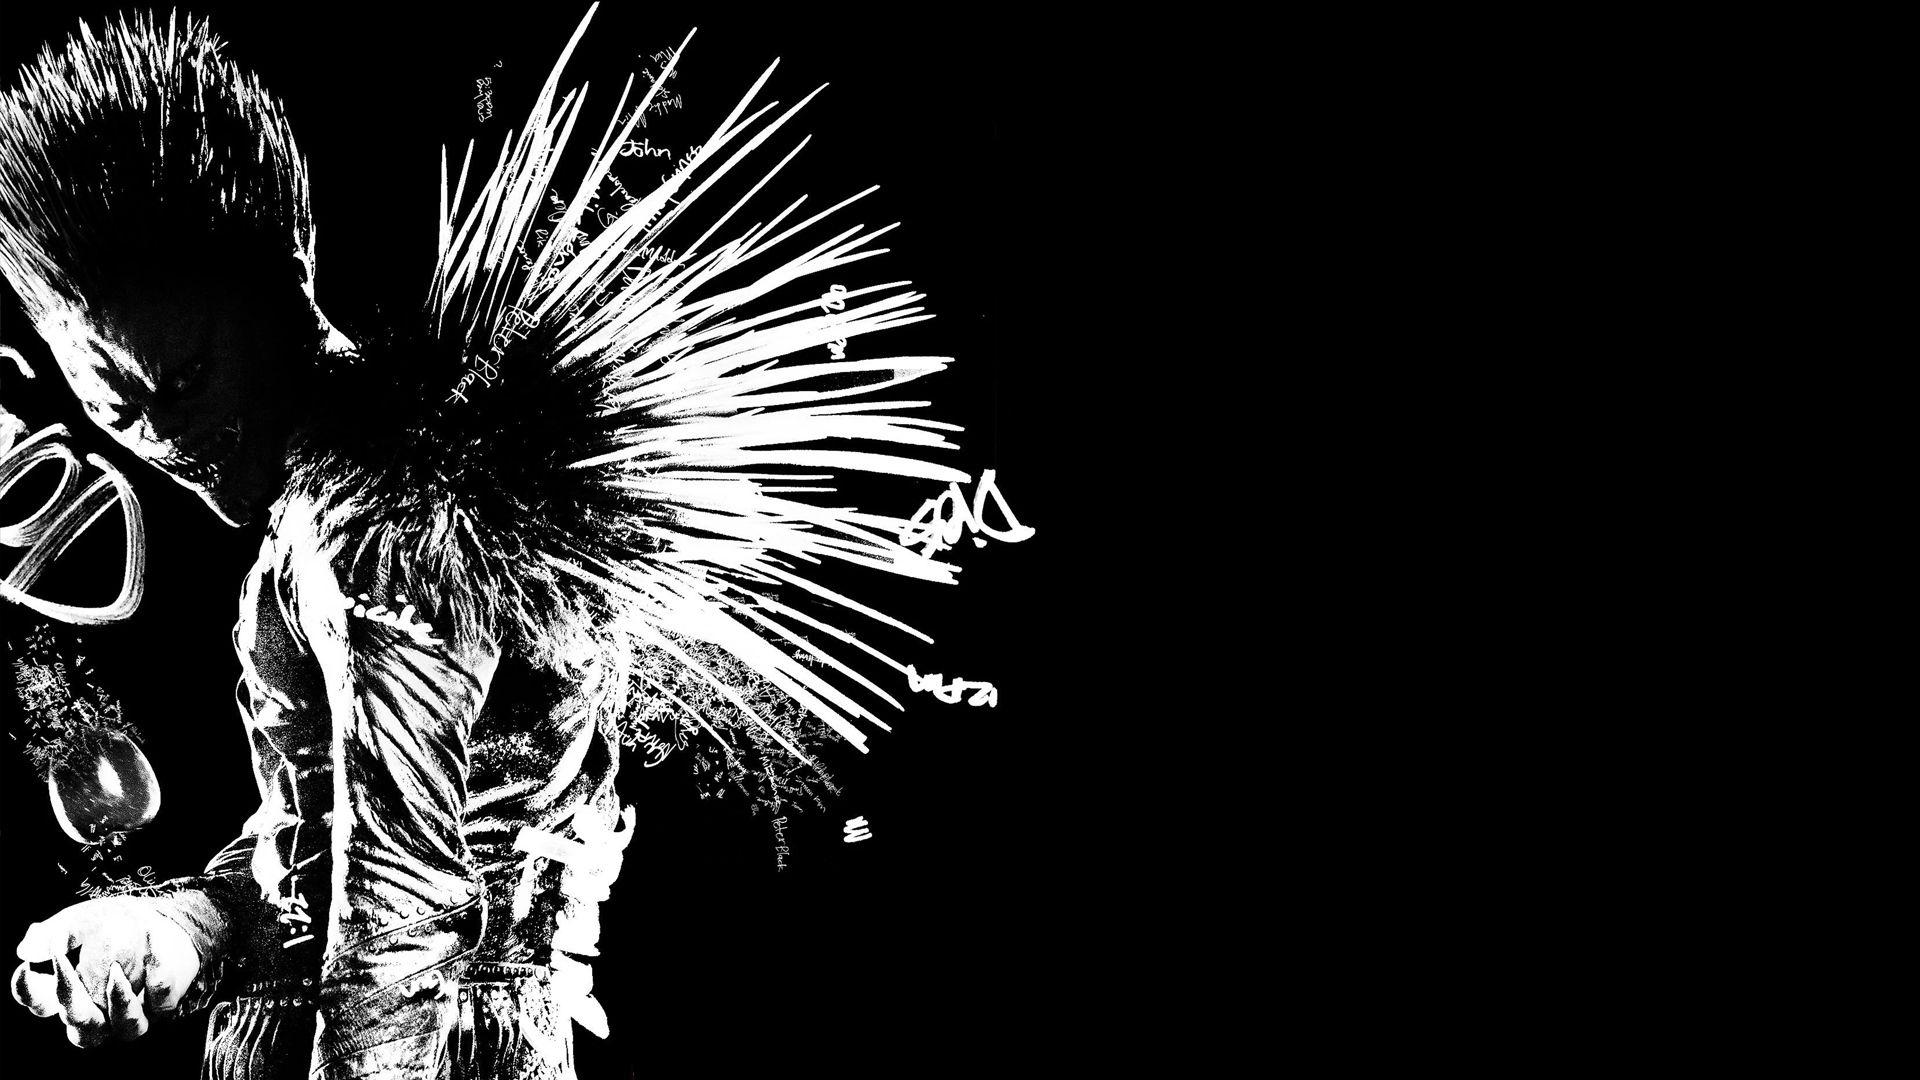 Death Note Ryuk Wallpapers HD - Wallpaper Cave